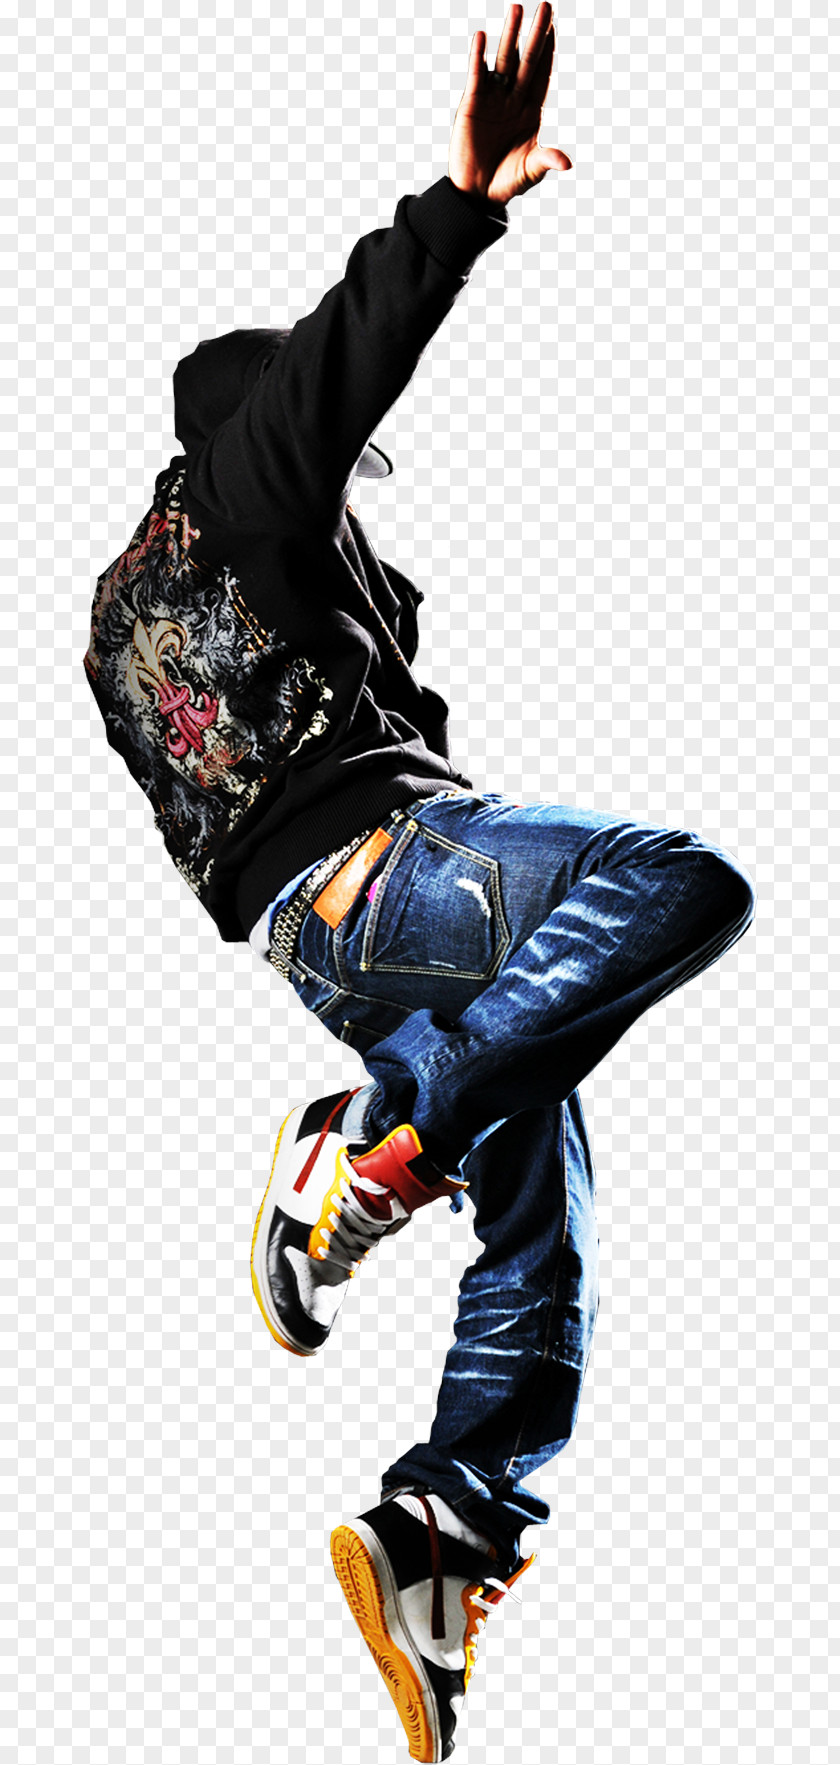 Balliernia Ecommerce Hip-hop Dance Free Step Breakdancing Image PNG